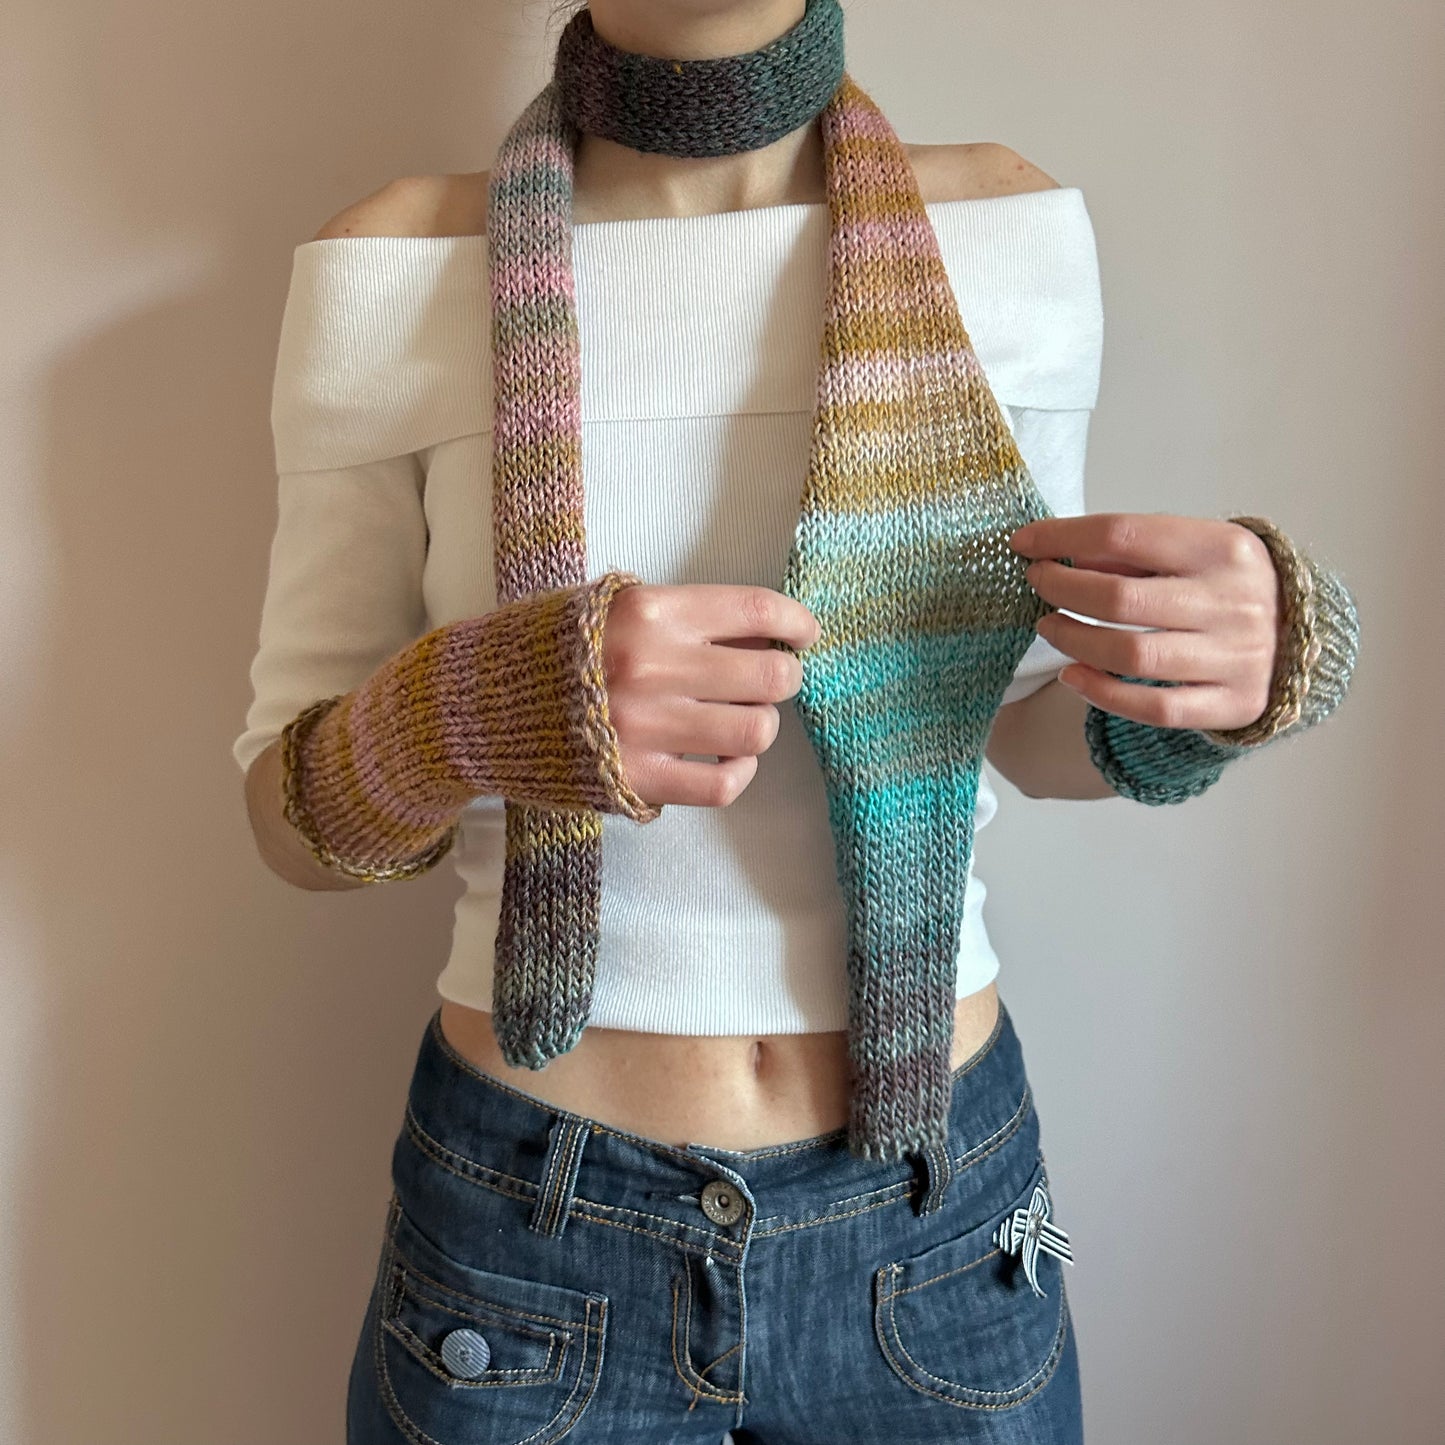 Handmade knitted ombré skinny scarf in Alba colourway